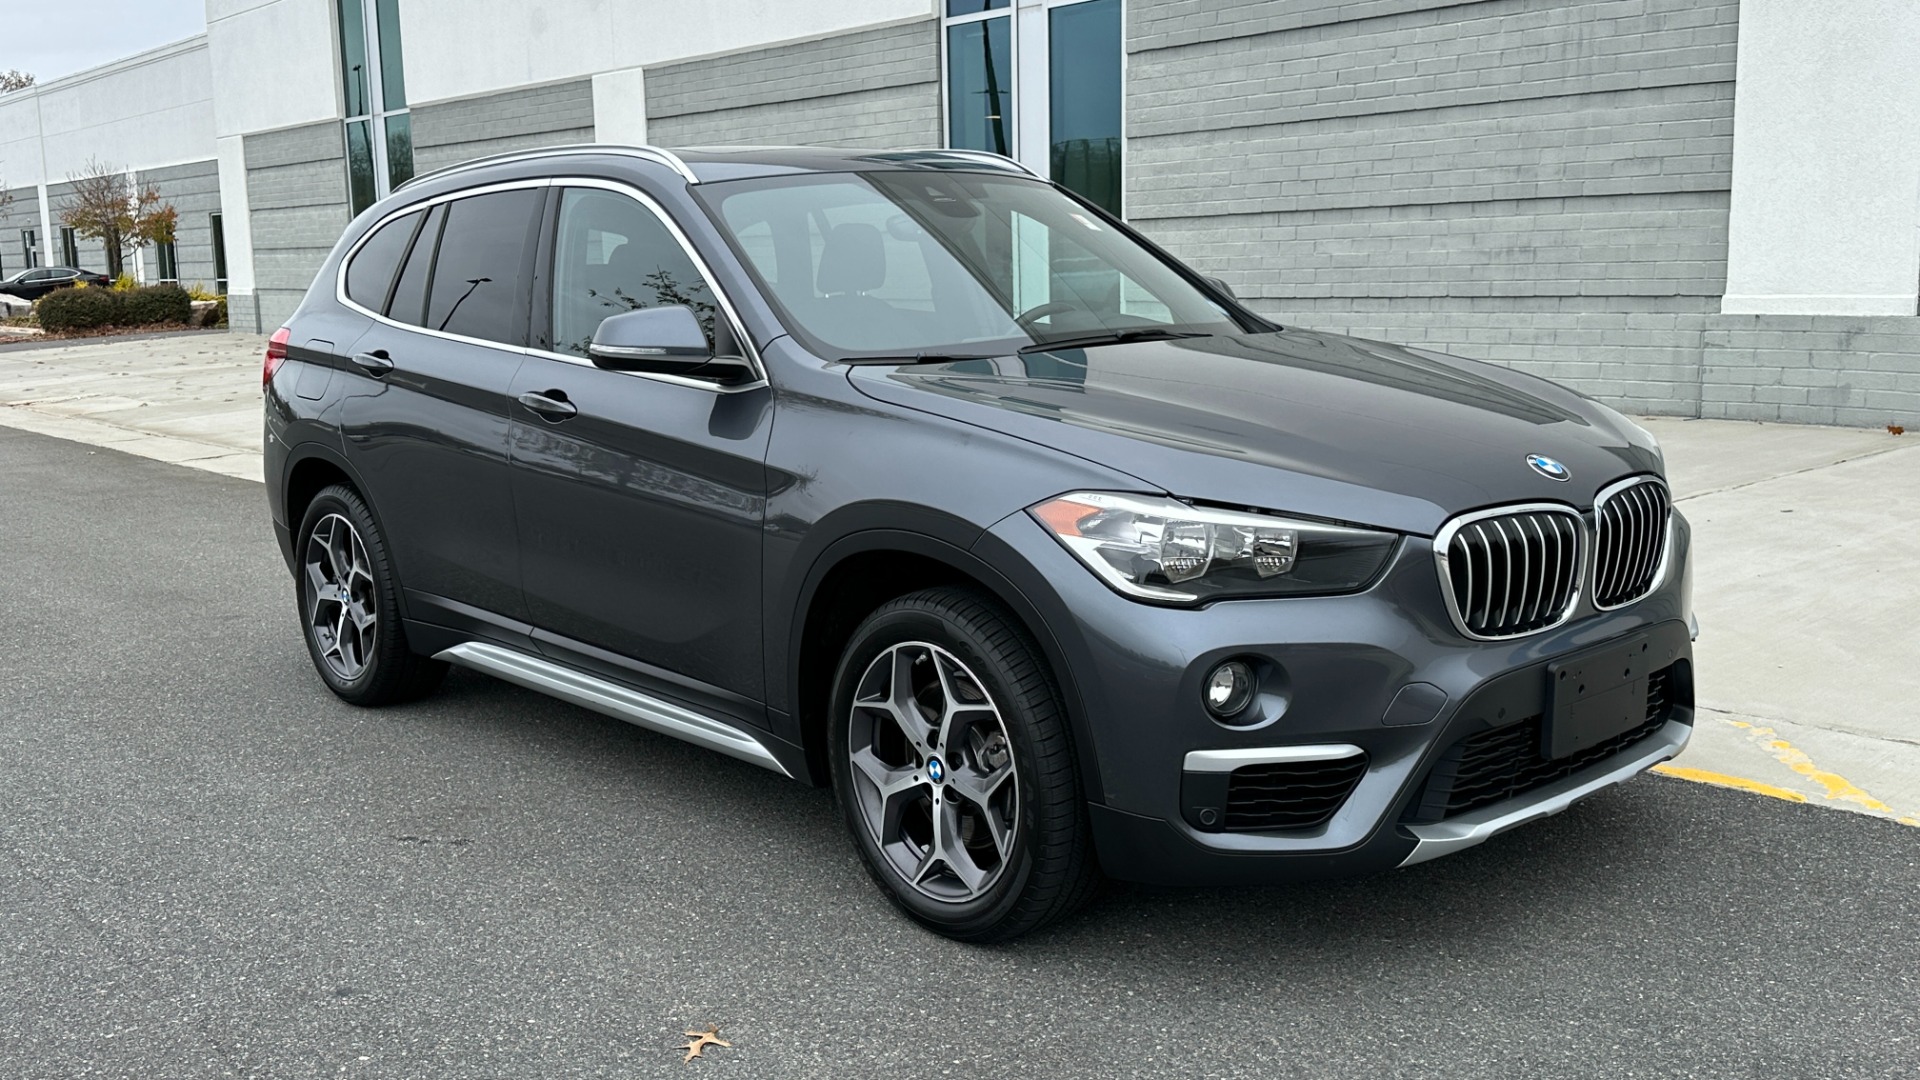 Used 2019 BMW X1 xDrive28i / PANORAMIC ROOF / HEATED SEATS / REVIEW CAMERA / LANE DEPARTURE for sale $31,995 at Formula Imports in Charlotte NC 28227 7